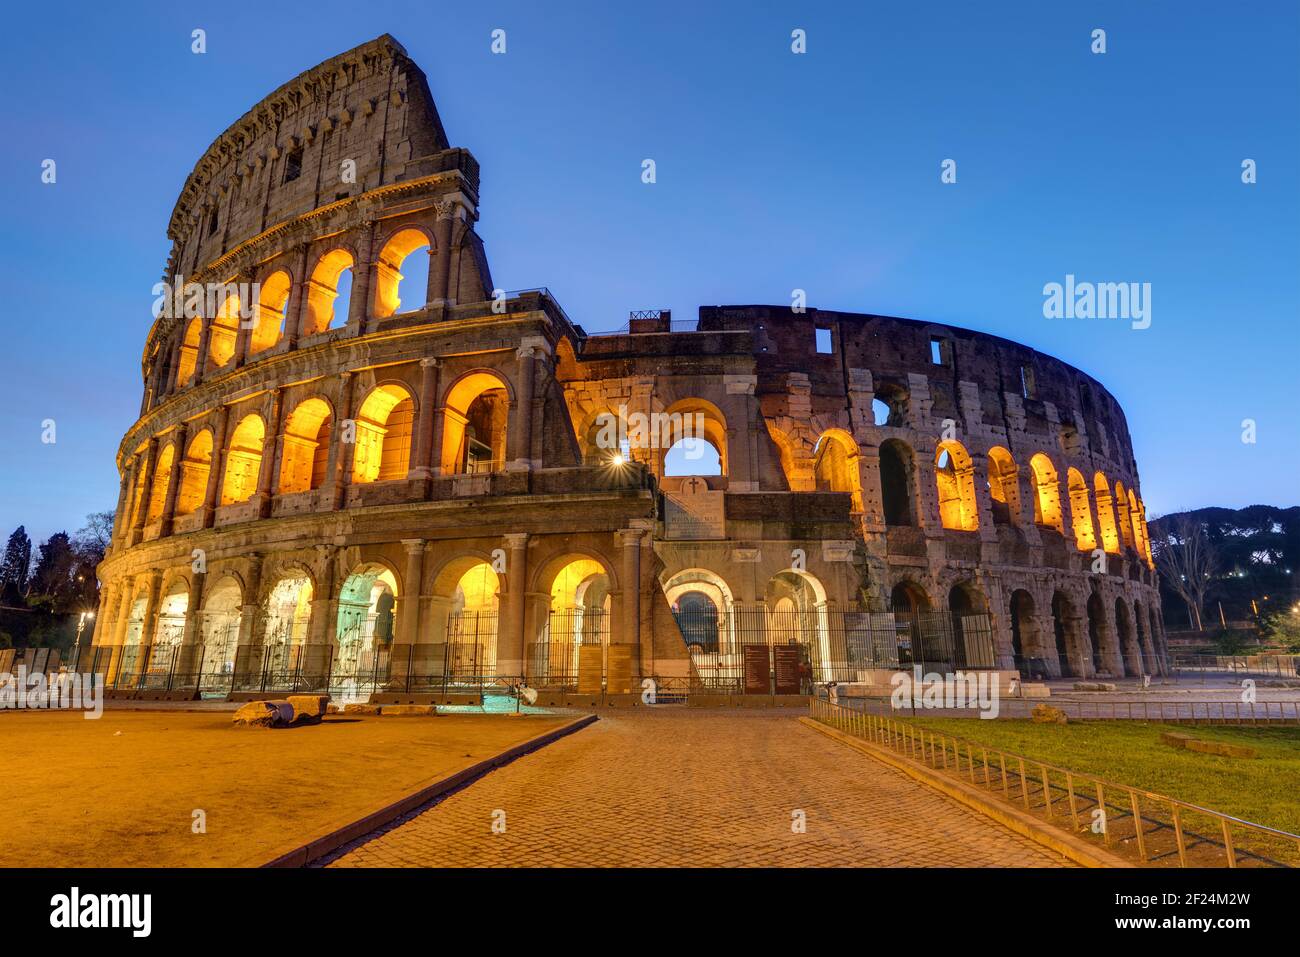 The famous Colosseum in Rome illuminated at twilight Stock Photo